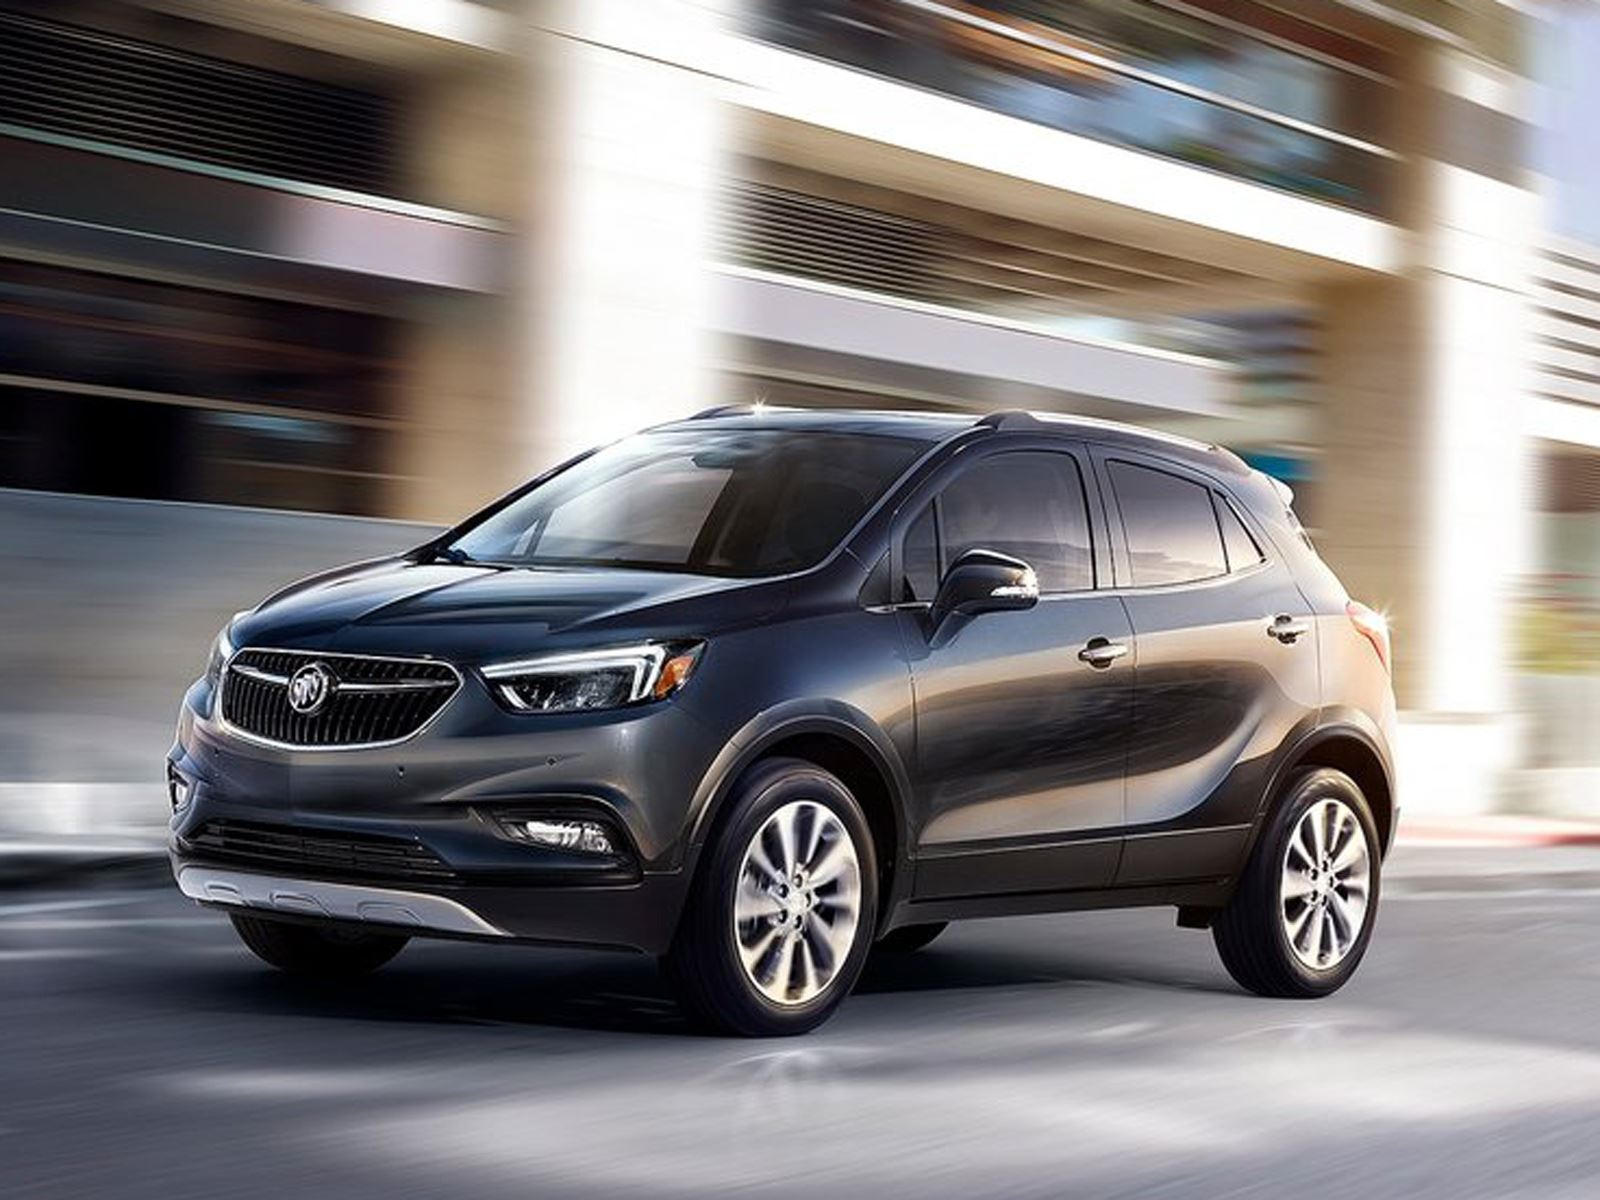 gm-is-cutting-the-prices-on-6-of-its-most-popular-suvs-for-2019-carbuzz